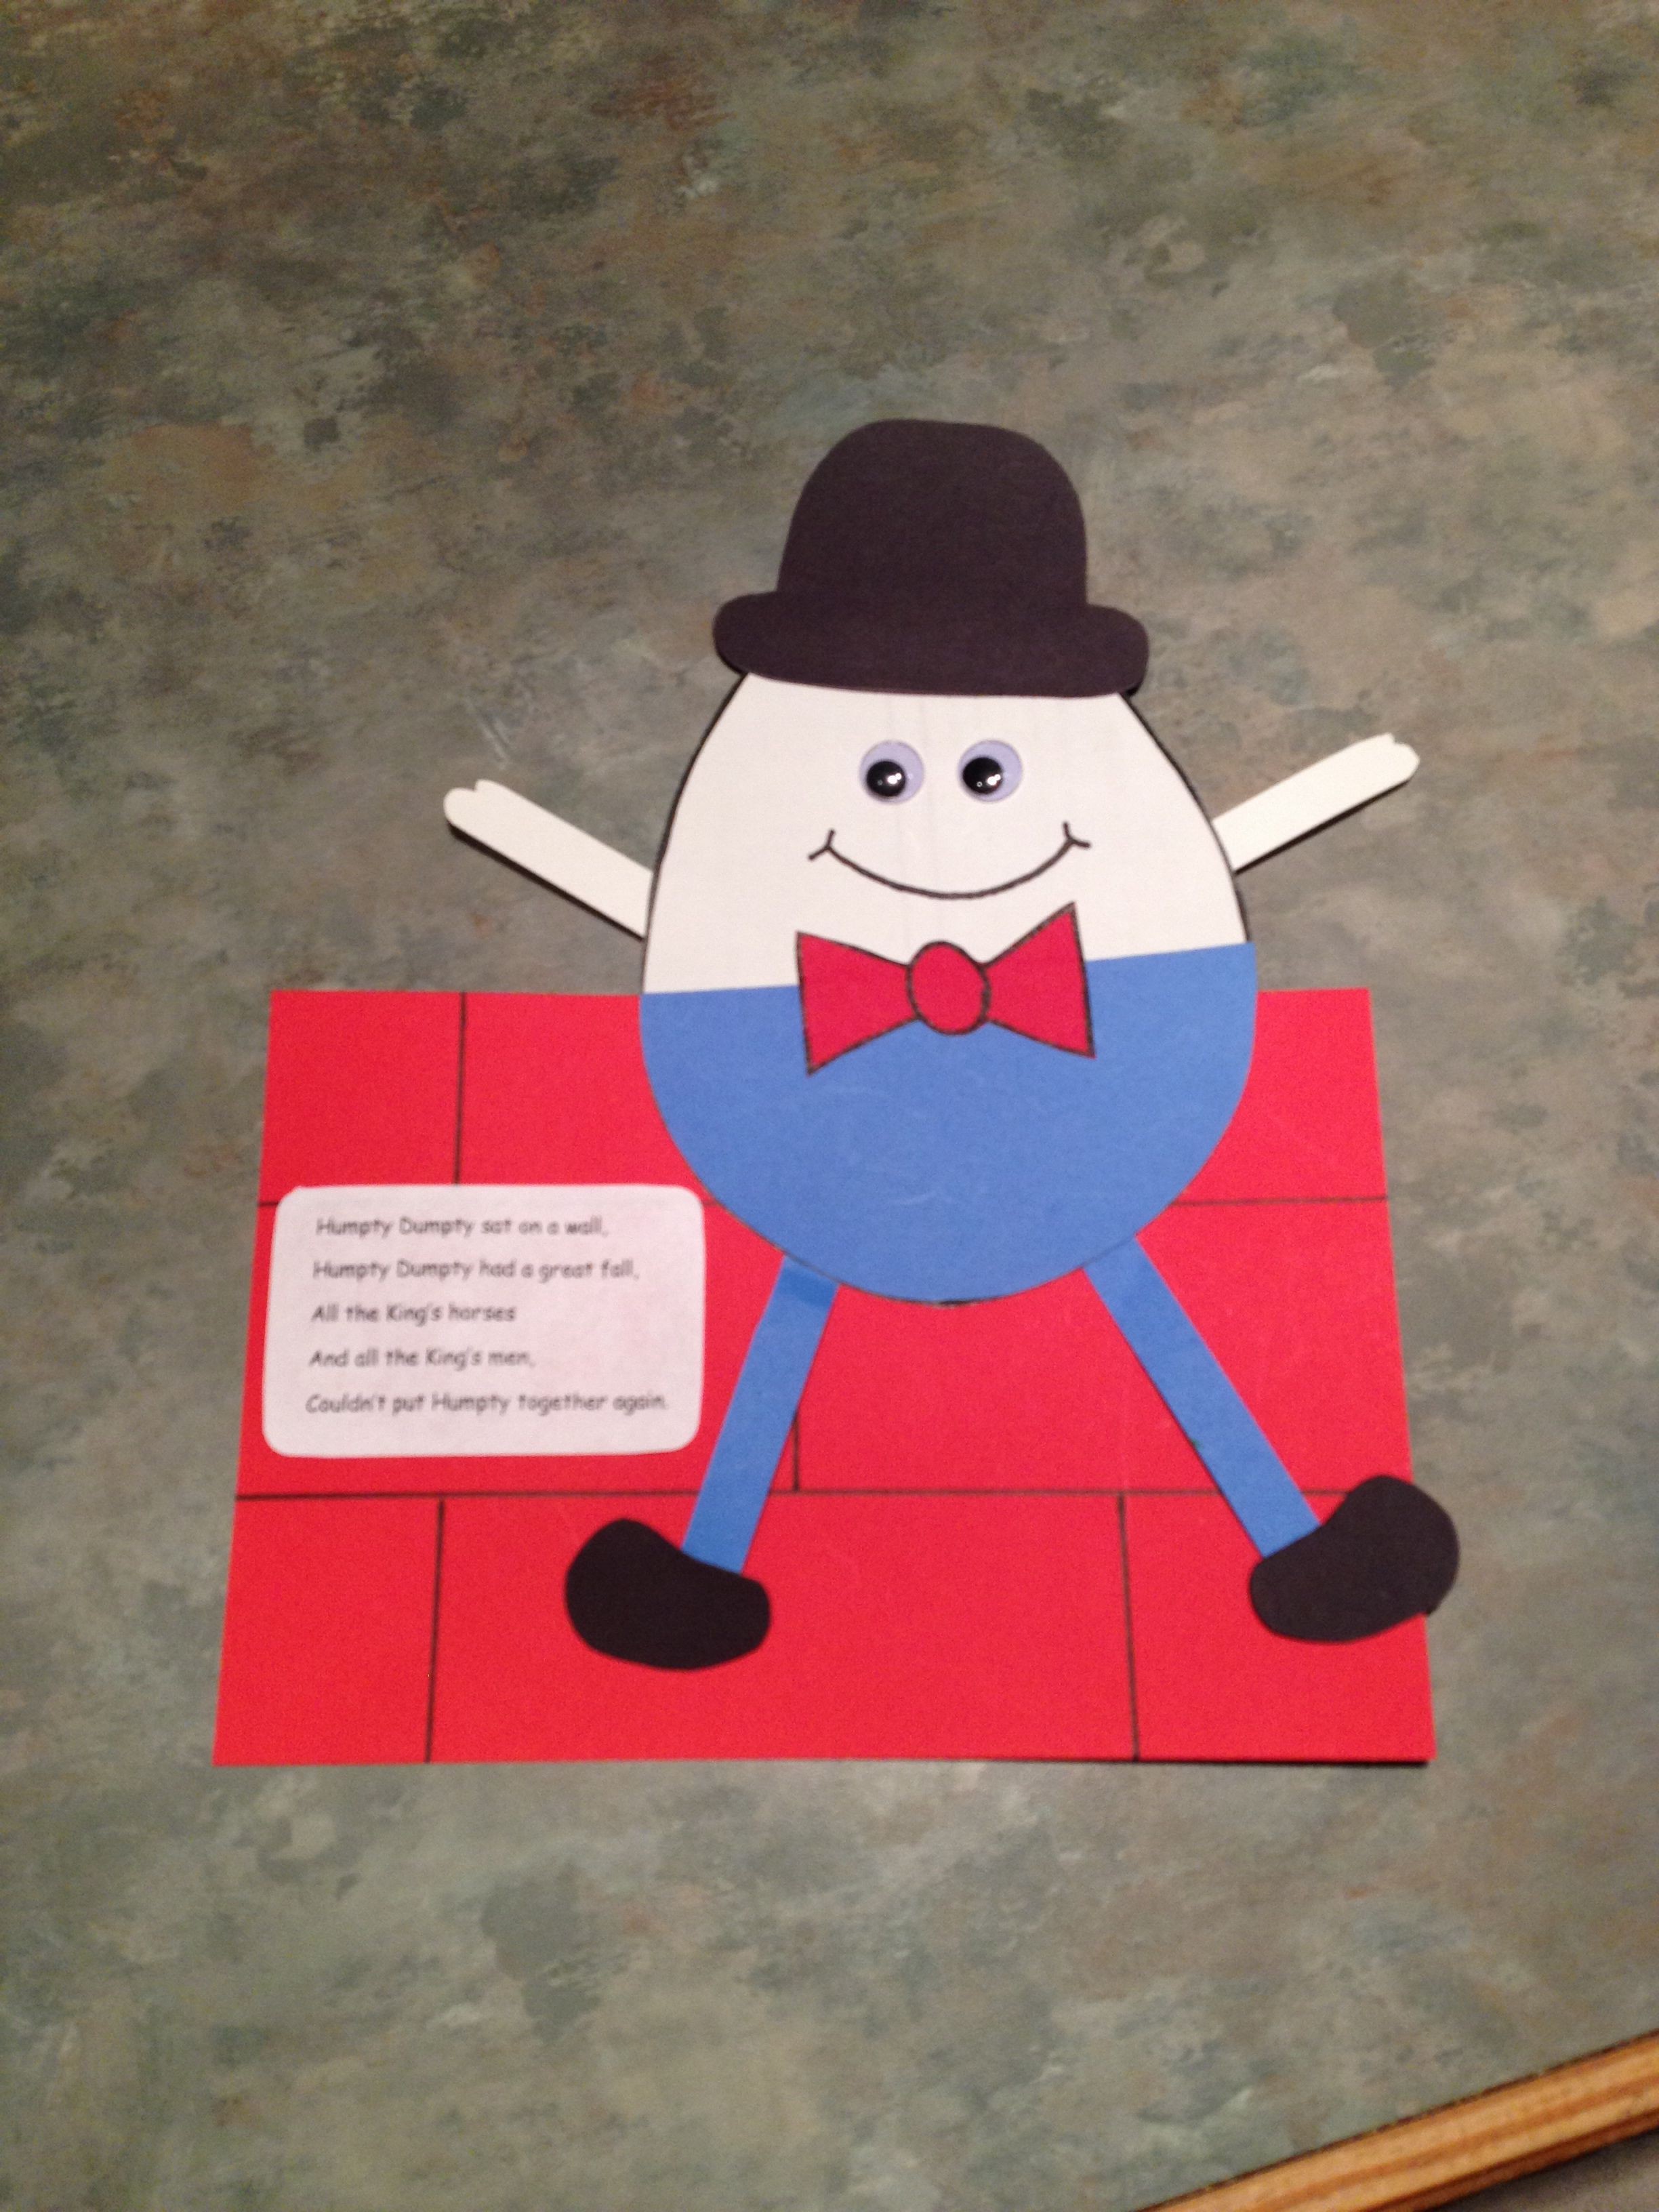 Soul Eater Papercraft Humpty Dumpty Craft for the Classroom Pinterest